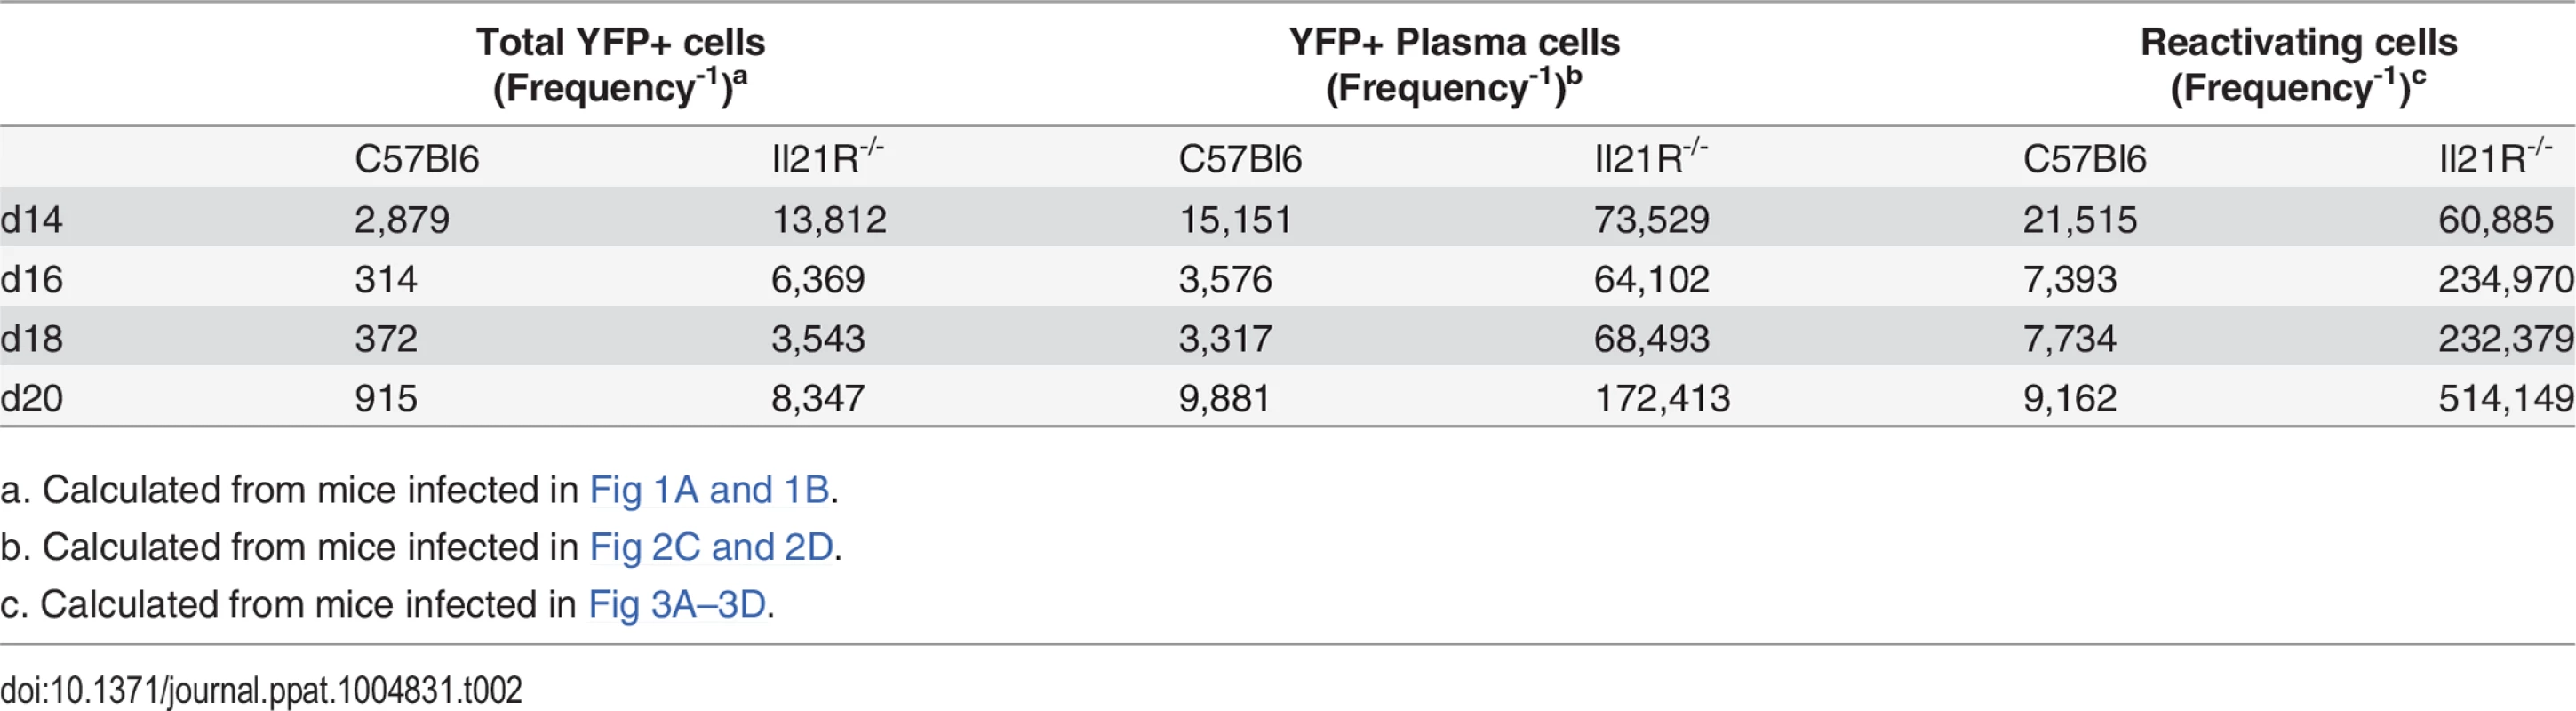 Correlation between infected plasma cells and reactivating cells.